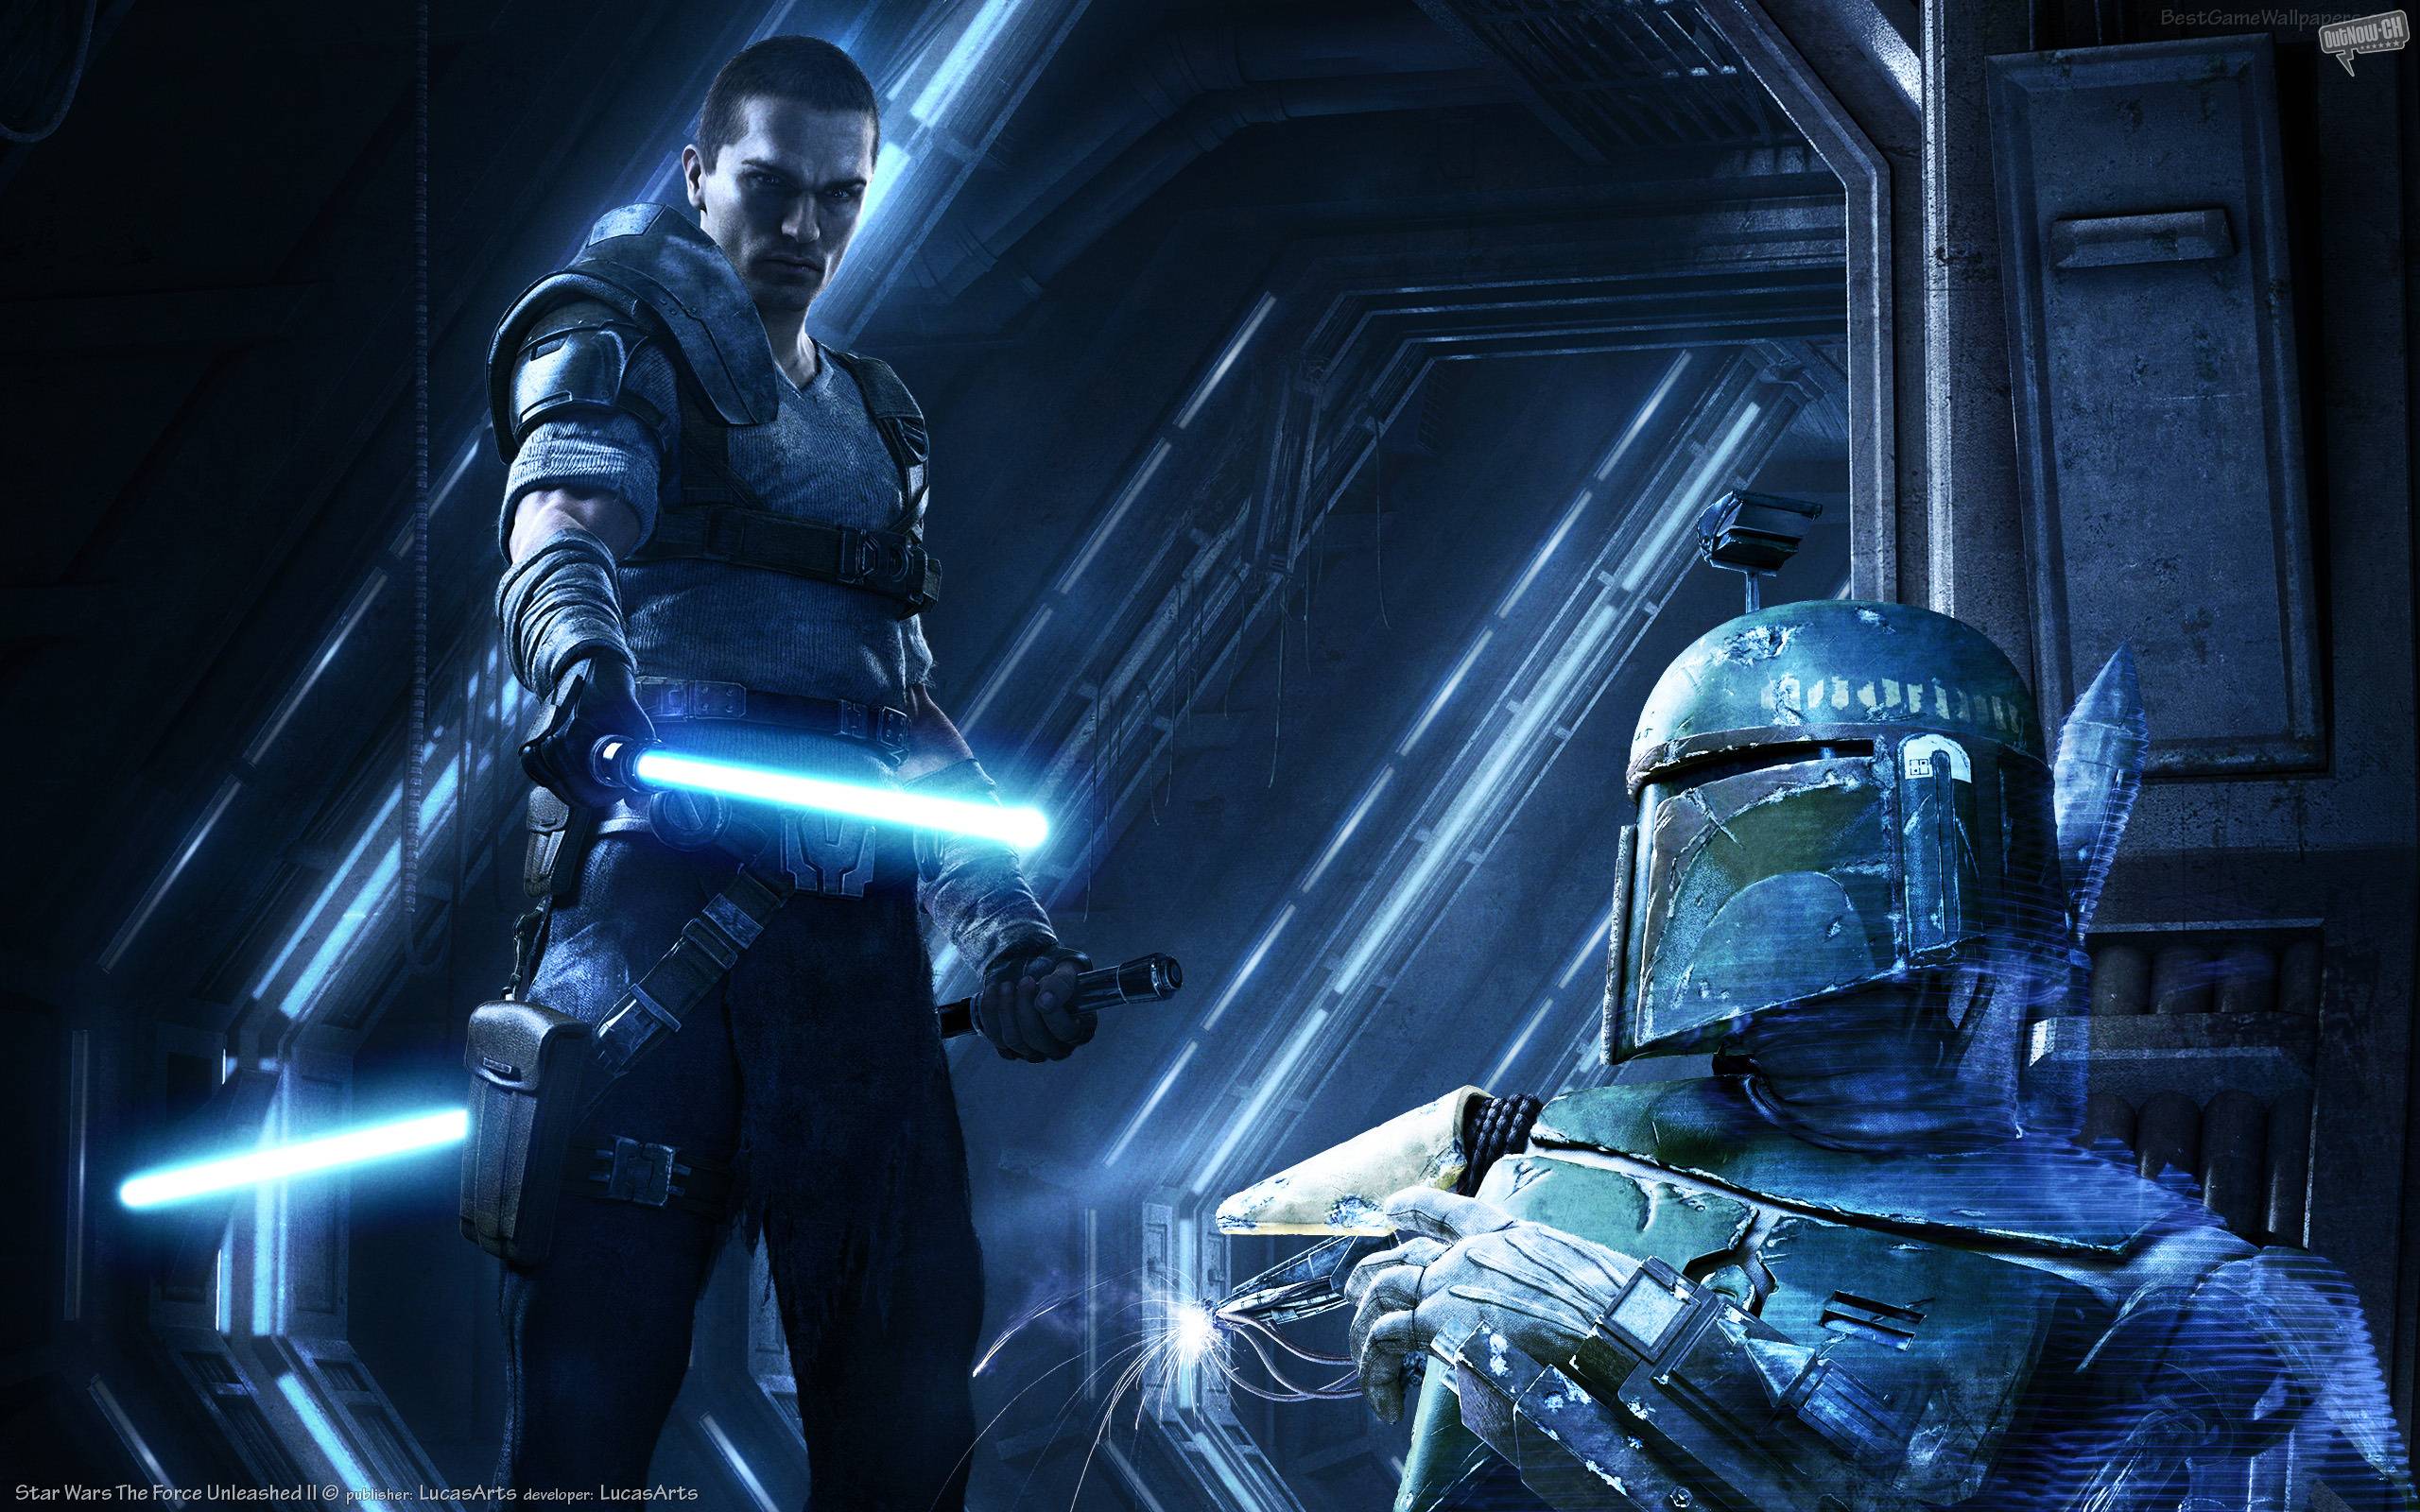 Star Wars The Force Unleashed 2 wallpaper